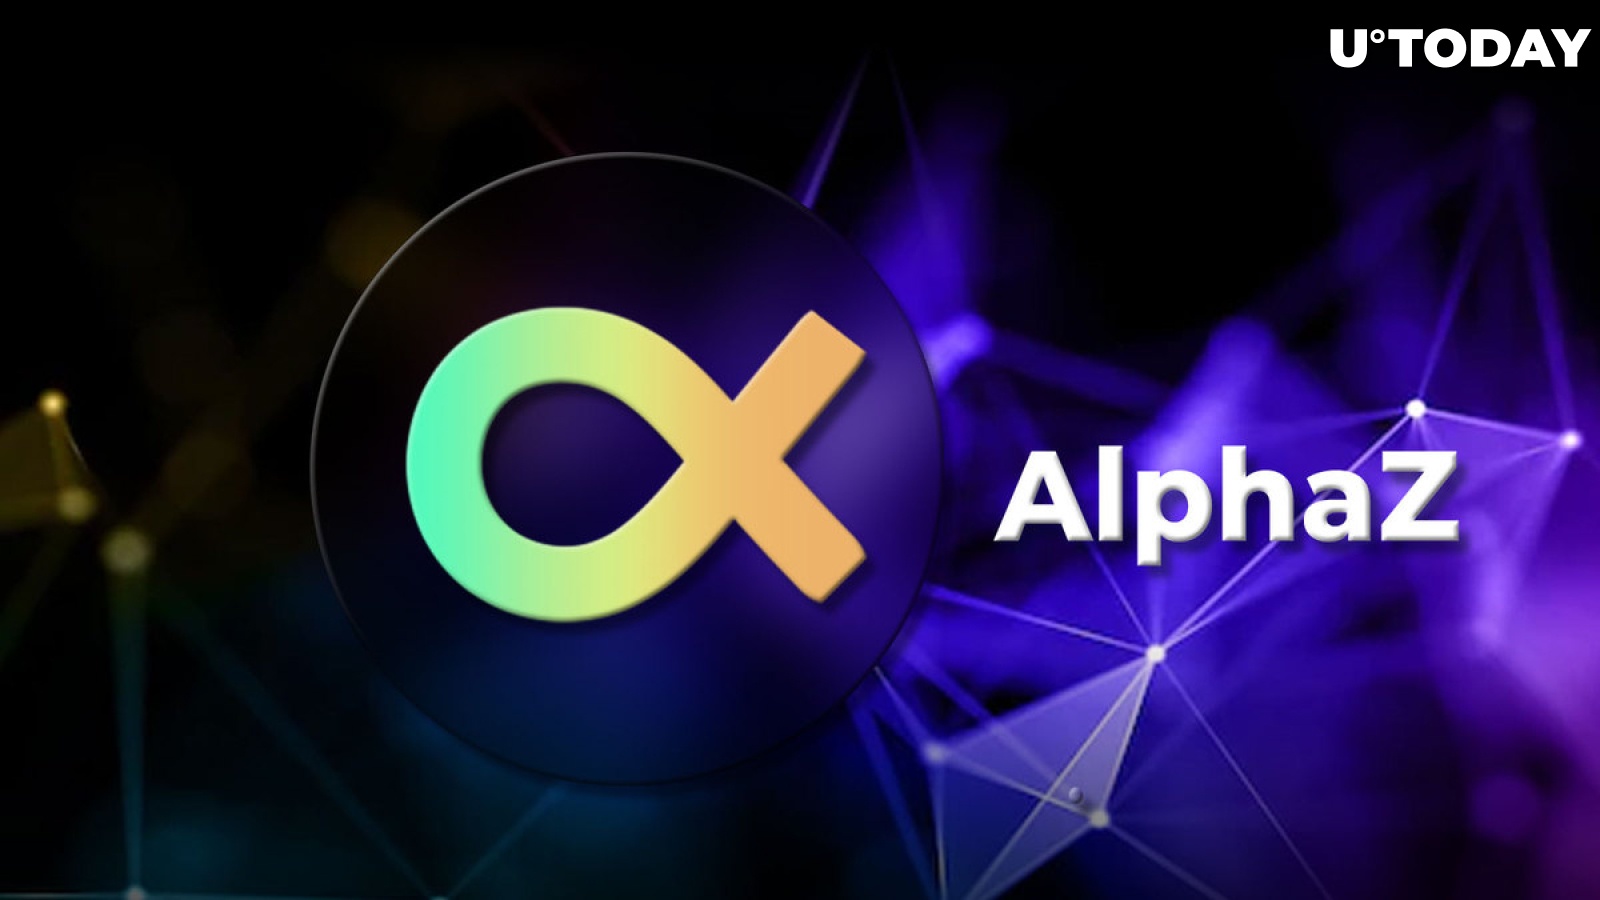 AlphaZ Launches Early Adopter Testing Campaign With $1,000 in Bonuses